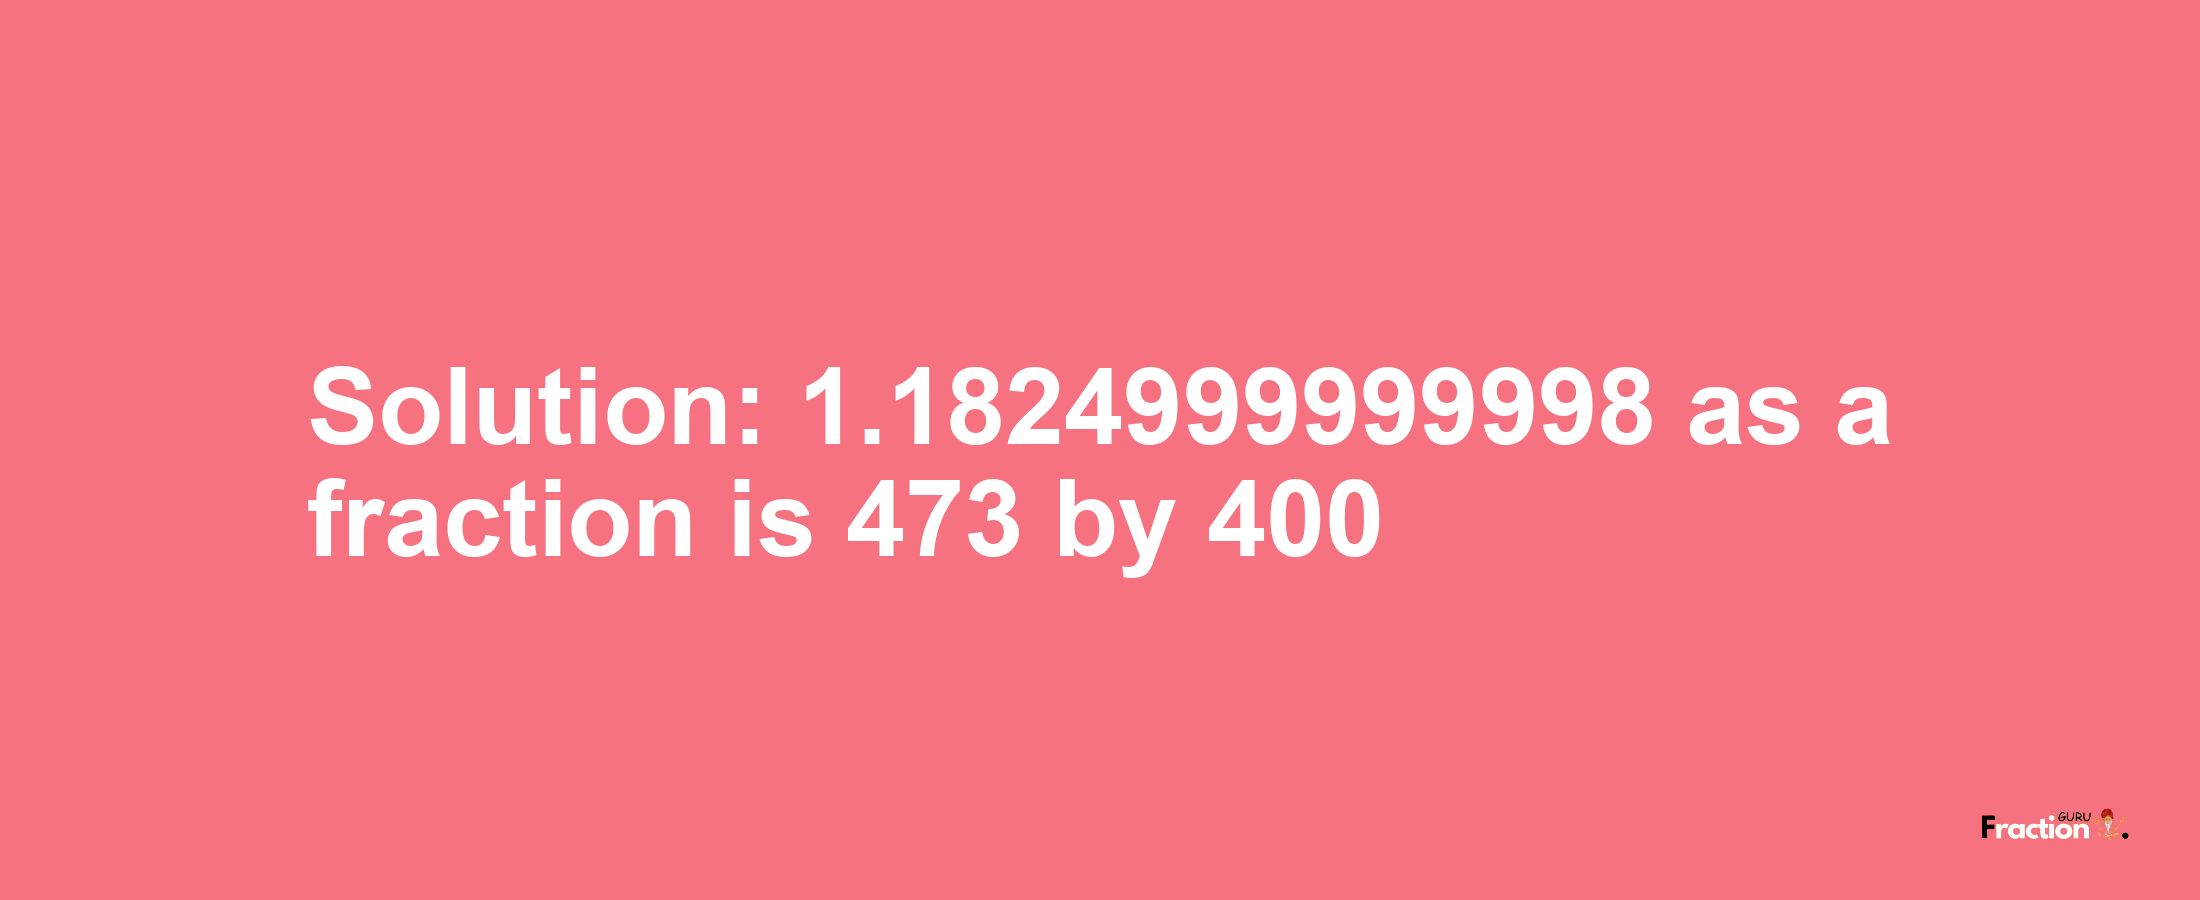 Solution:1.1824999999998 as a fraction is 473/400